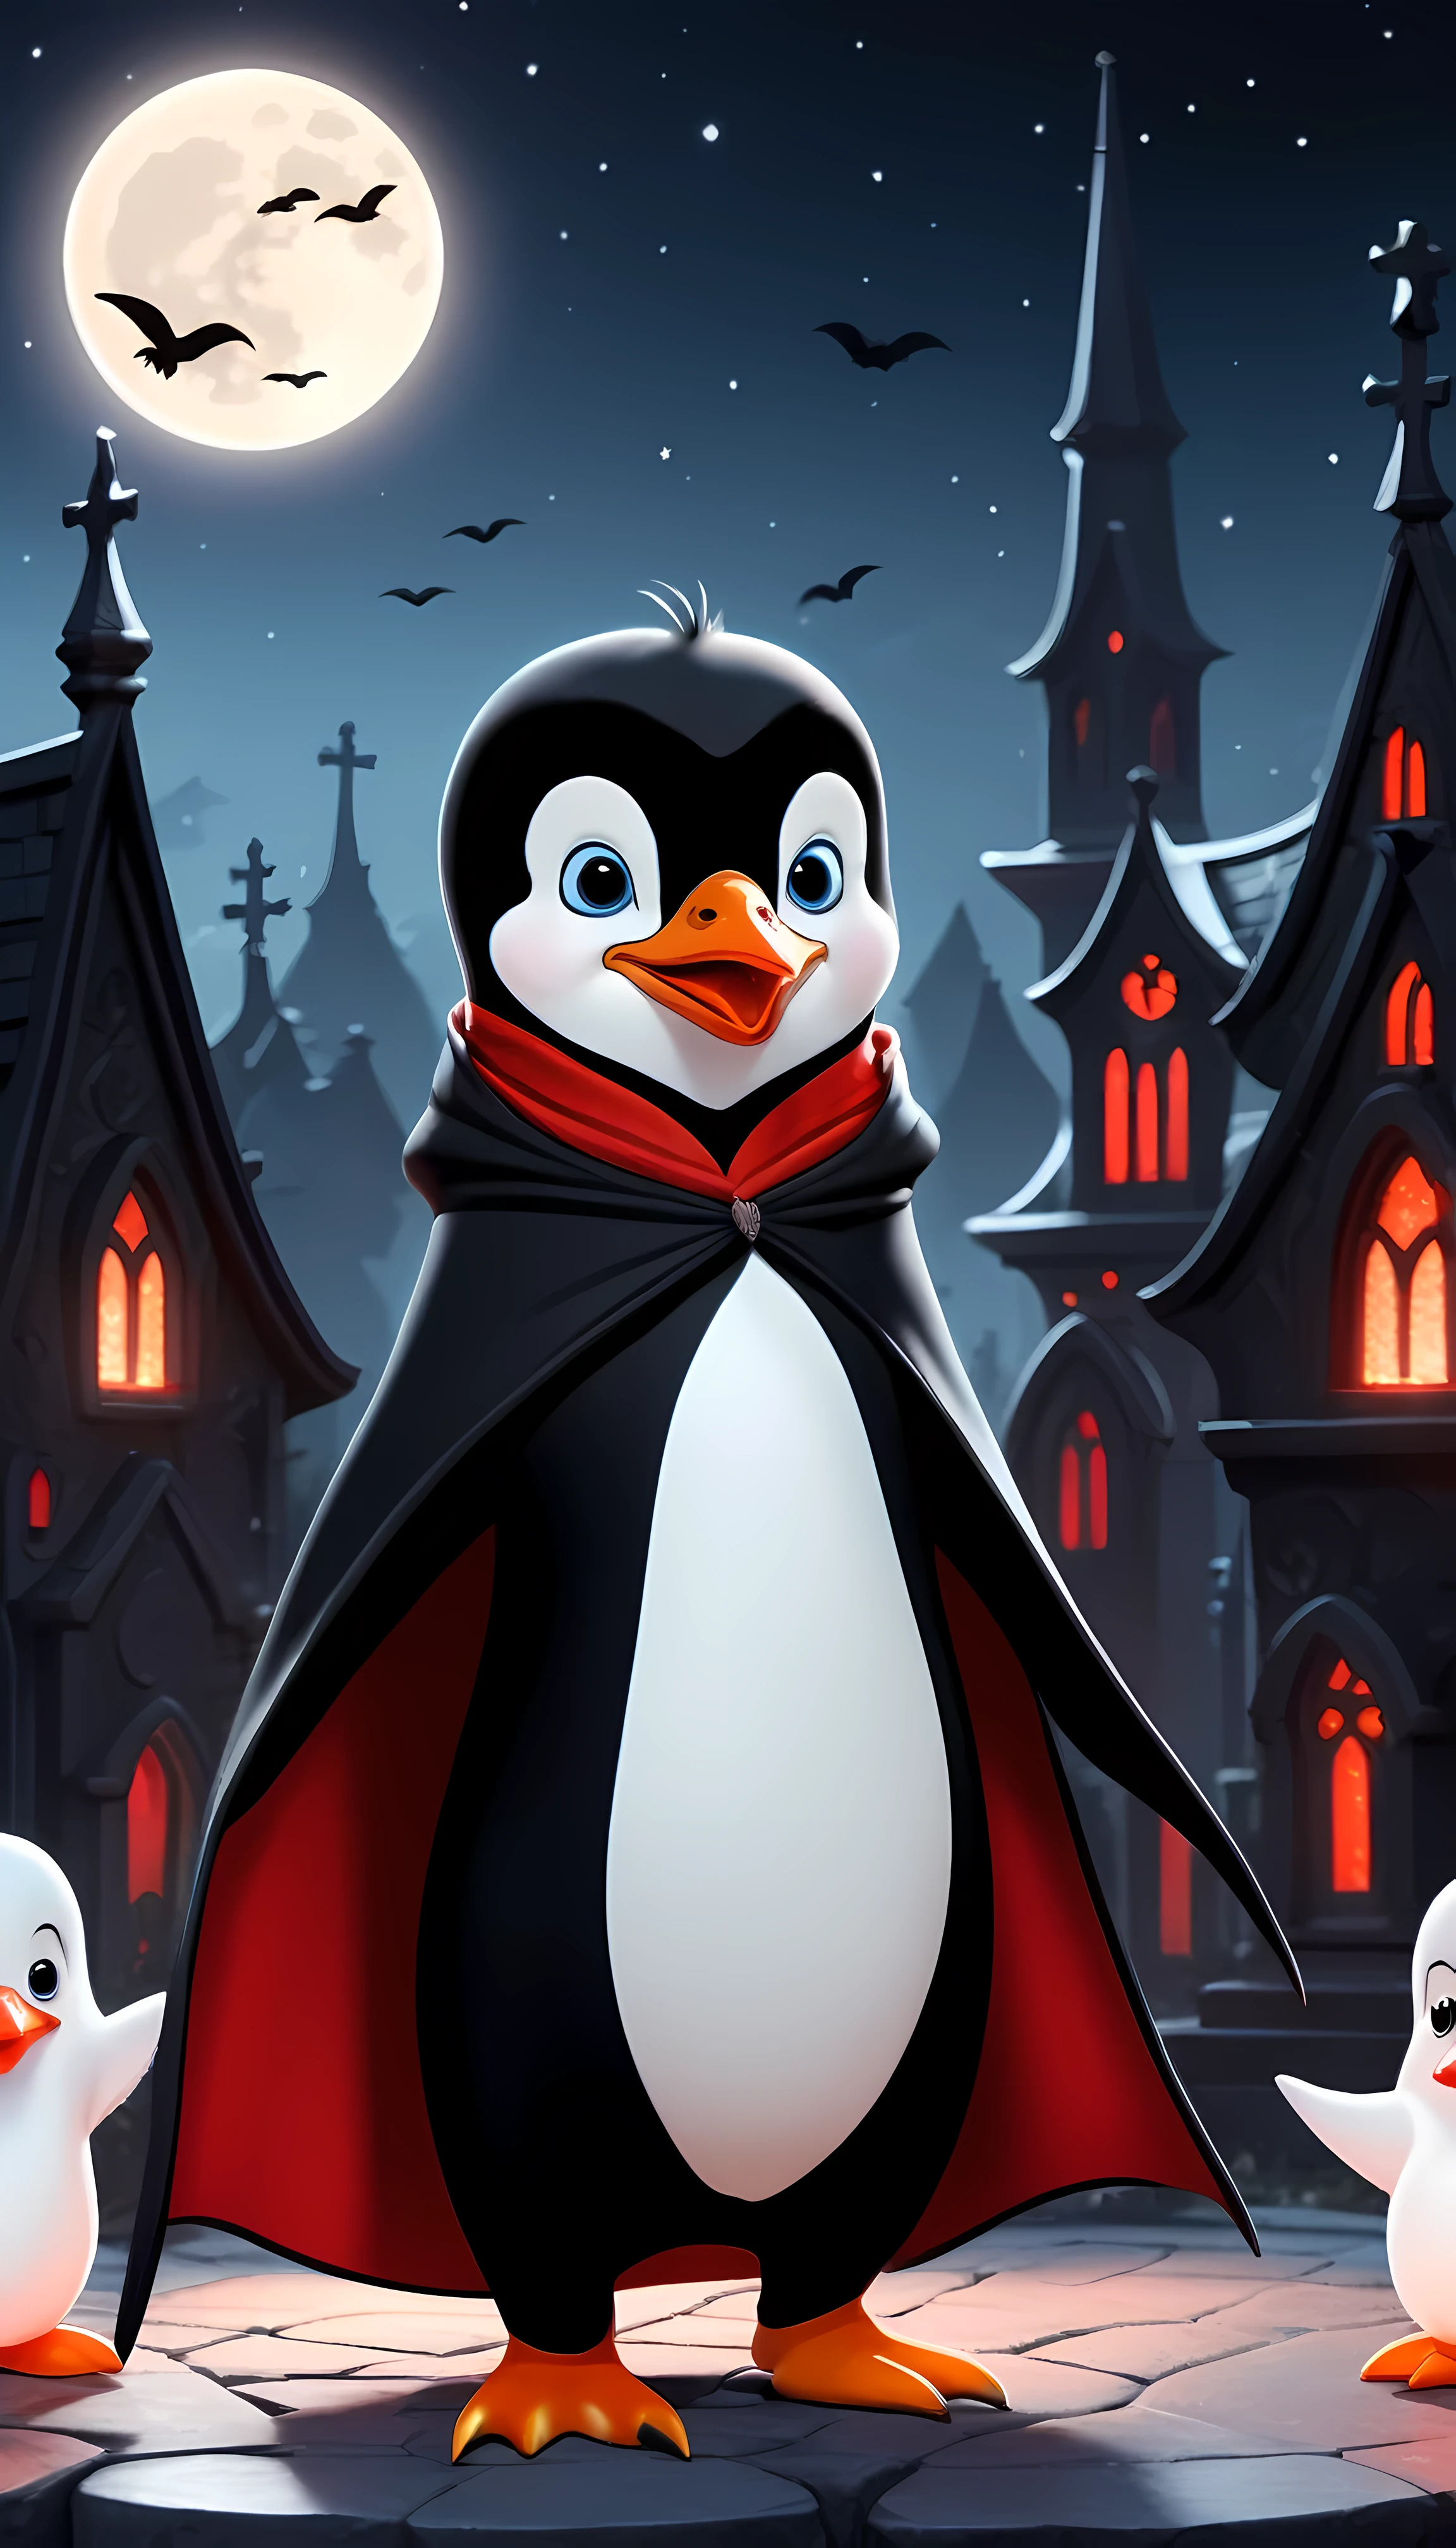 CuteCartoonAF, Cute Cartoon, Vlad the Penguin, a friendly and stylish penguin vampire dressed in a sleek black cape with striking red lining, surrounded with adorable floating ghosts amidst the moonlit graveyard setting. | ((More_Detail))